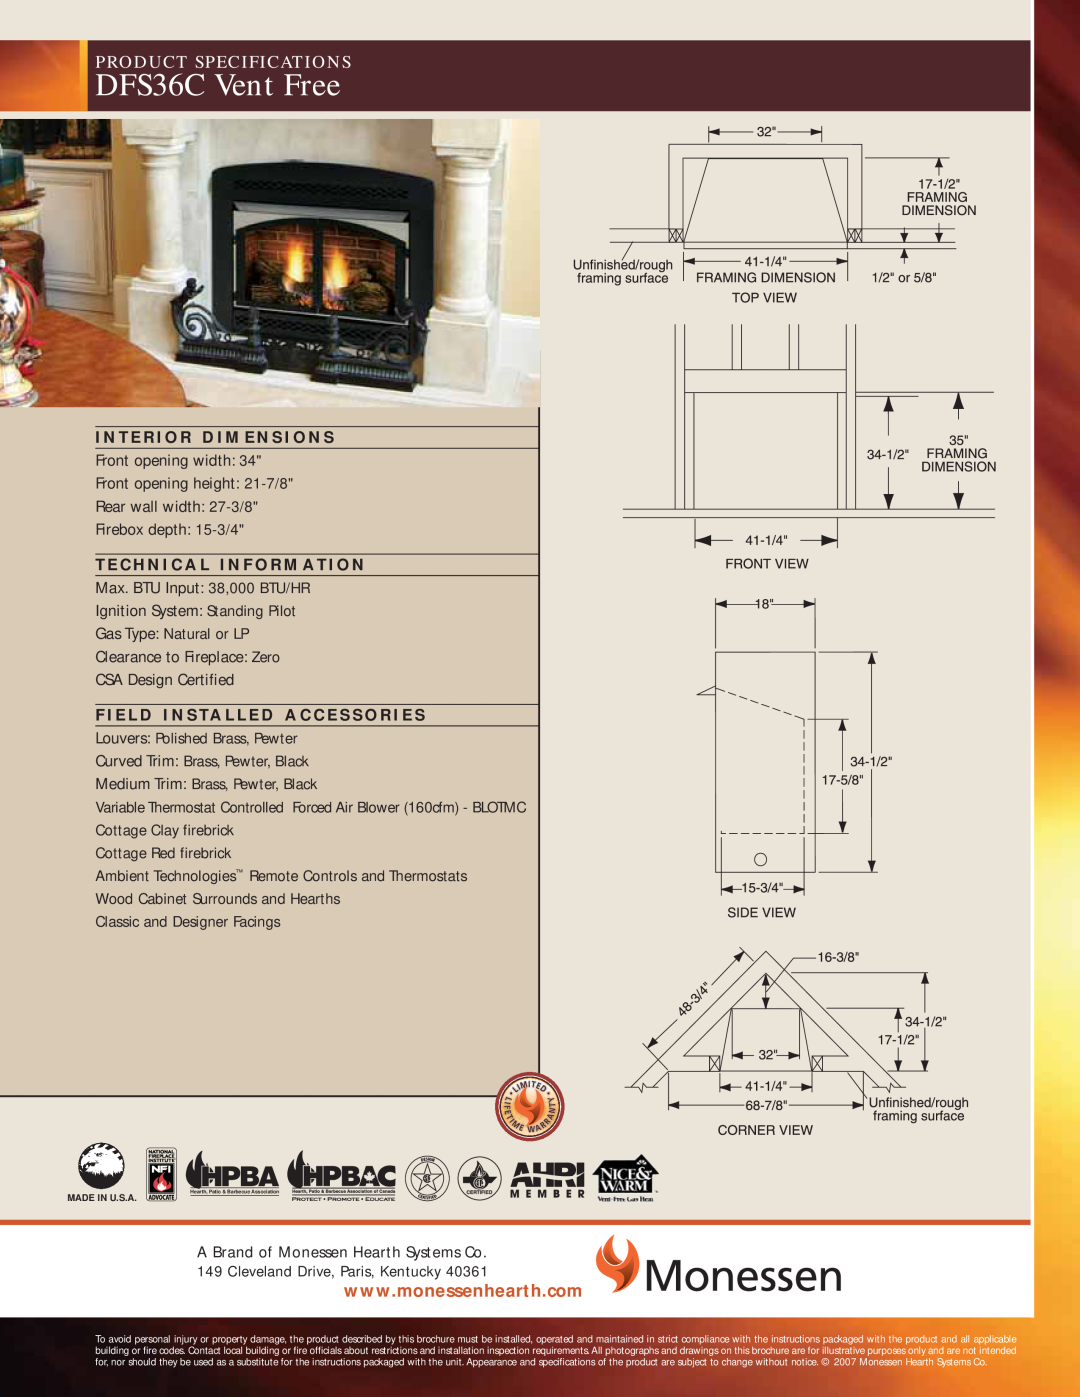 Monessen Hearth specifications DFS36C Vent Free, Product Specifications 